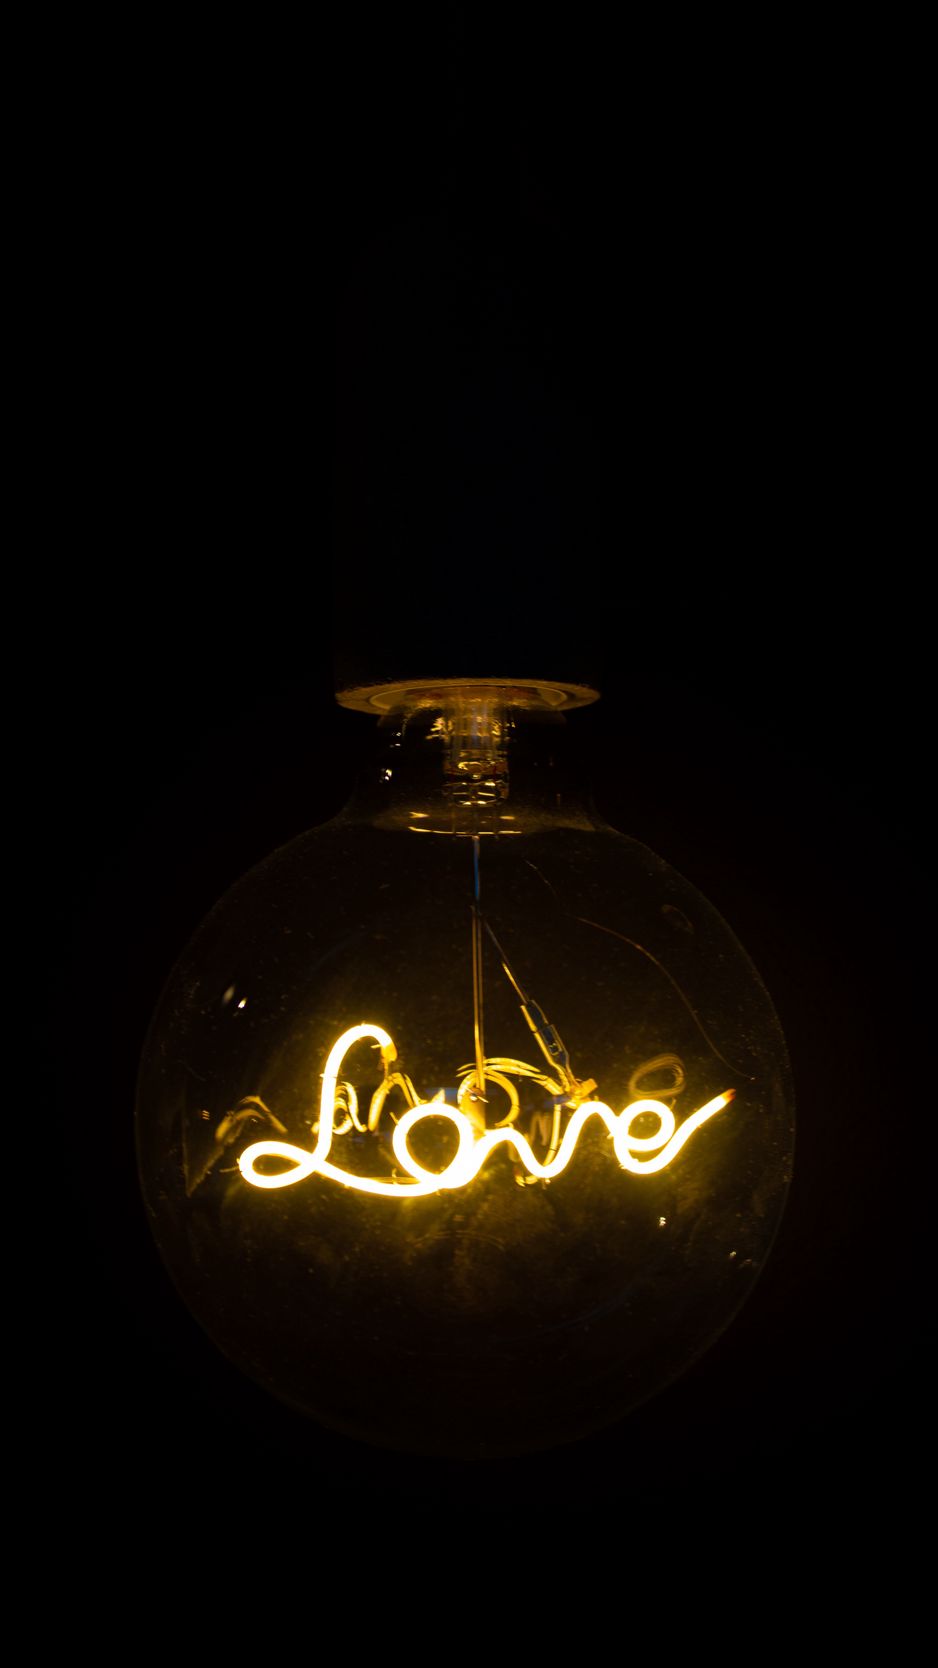 Download wallpaper 938x1668 love, neon, lamp, inscription, word iphone  8/7/6s/6 for parallax hd background